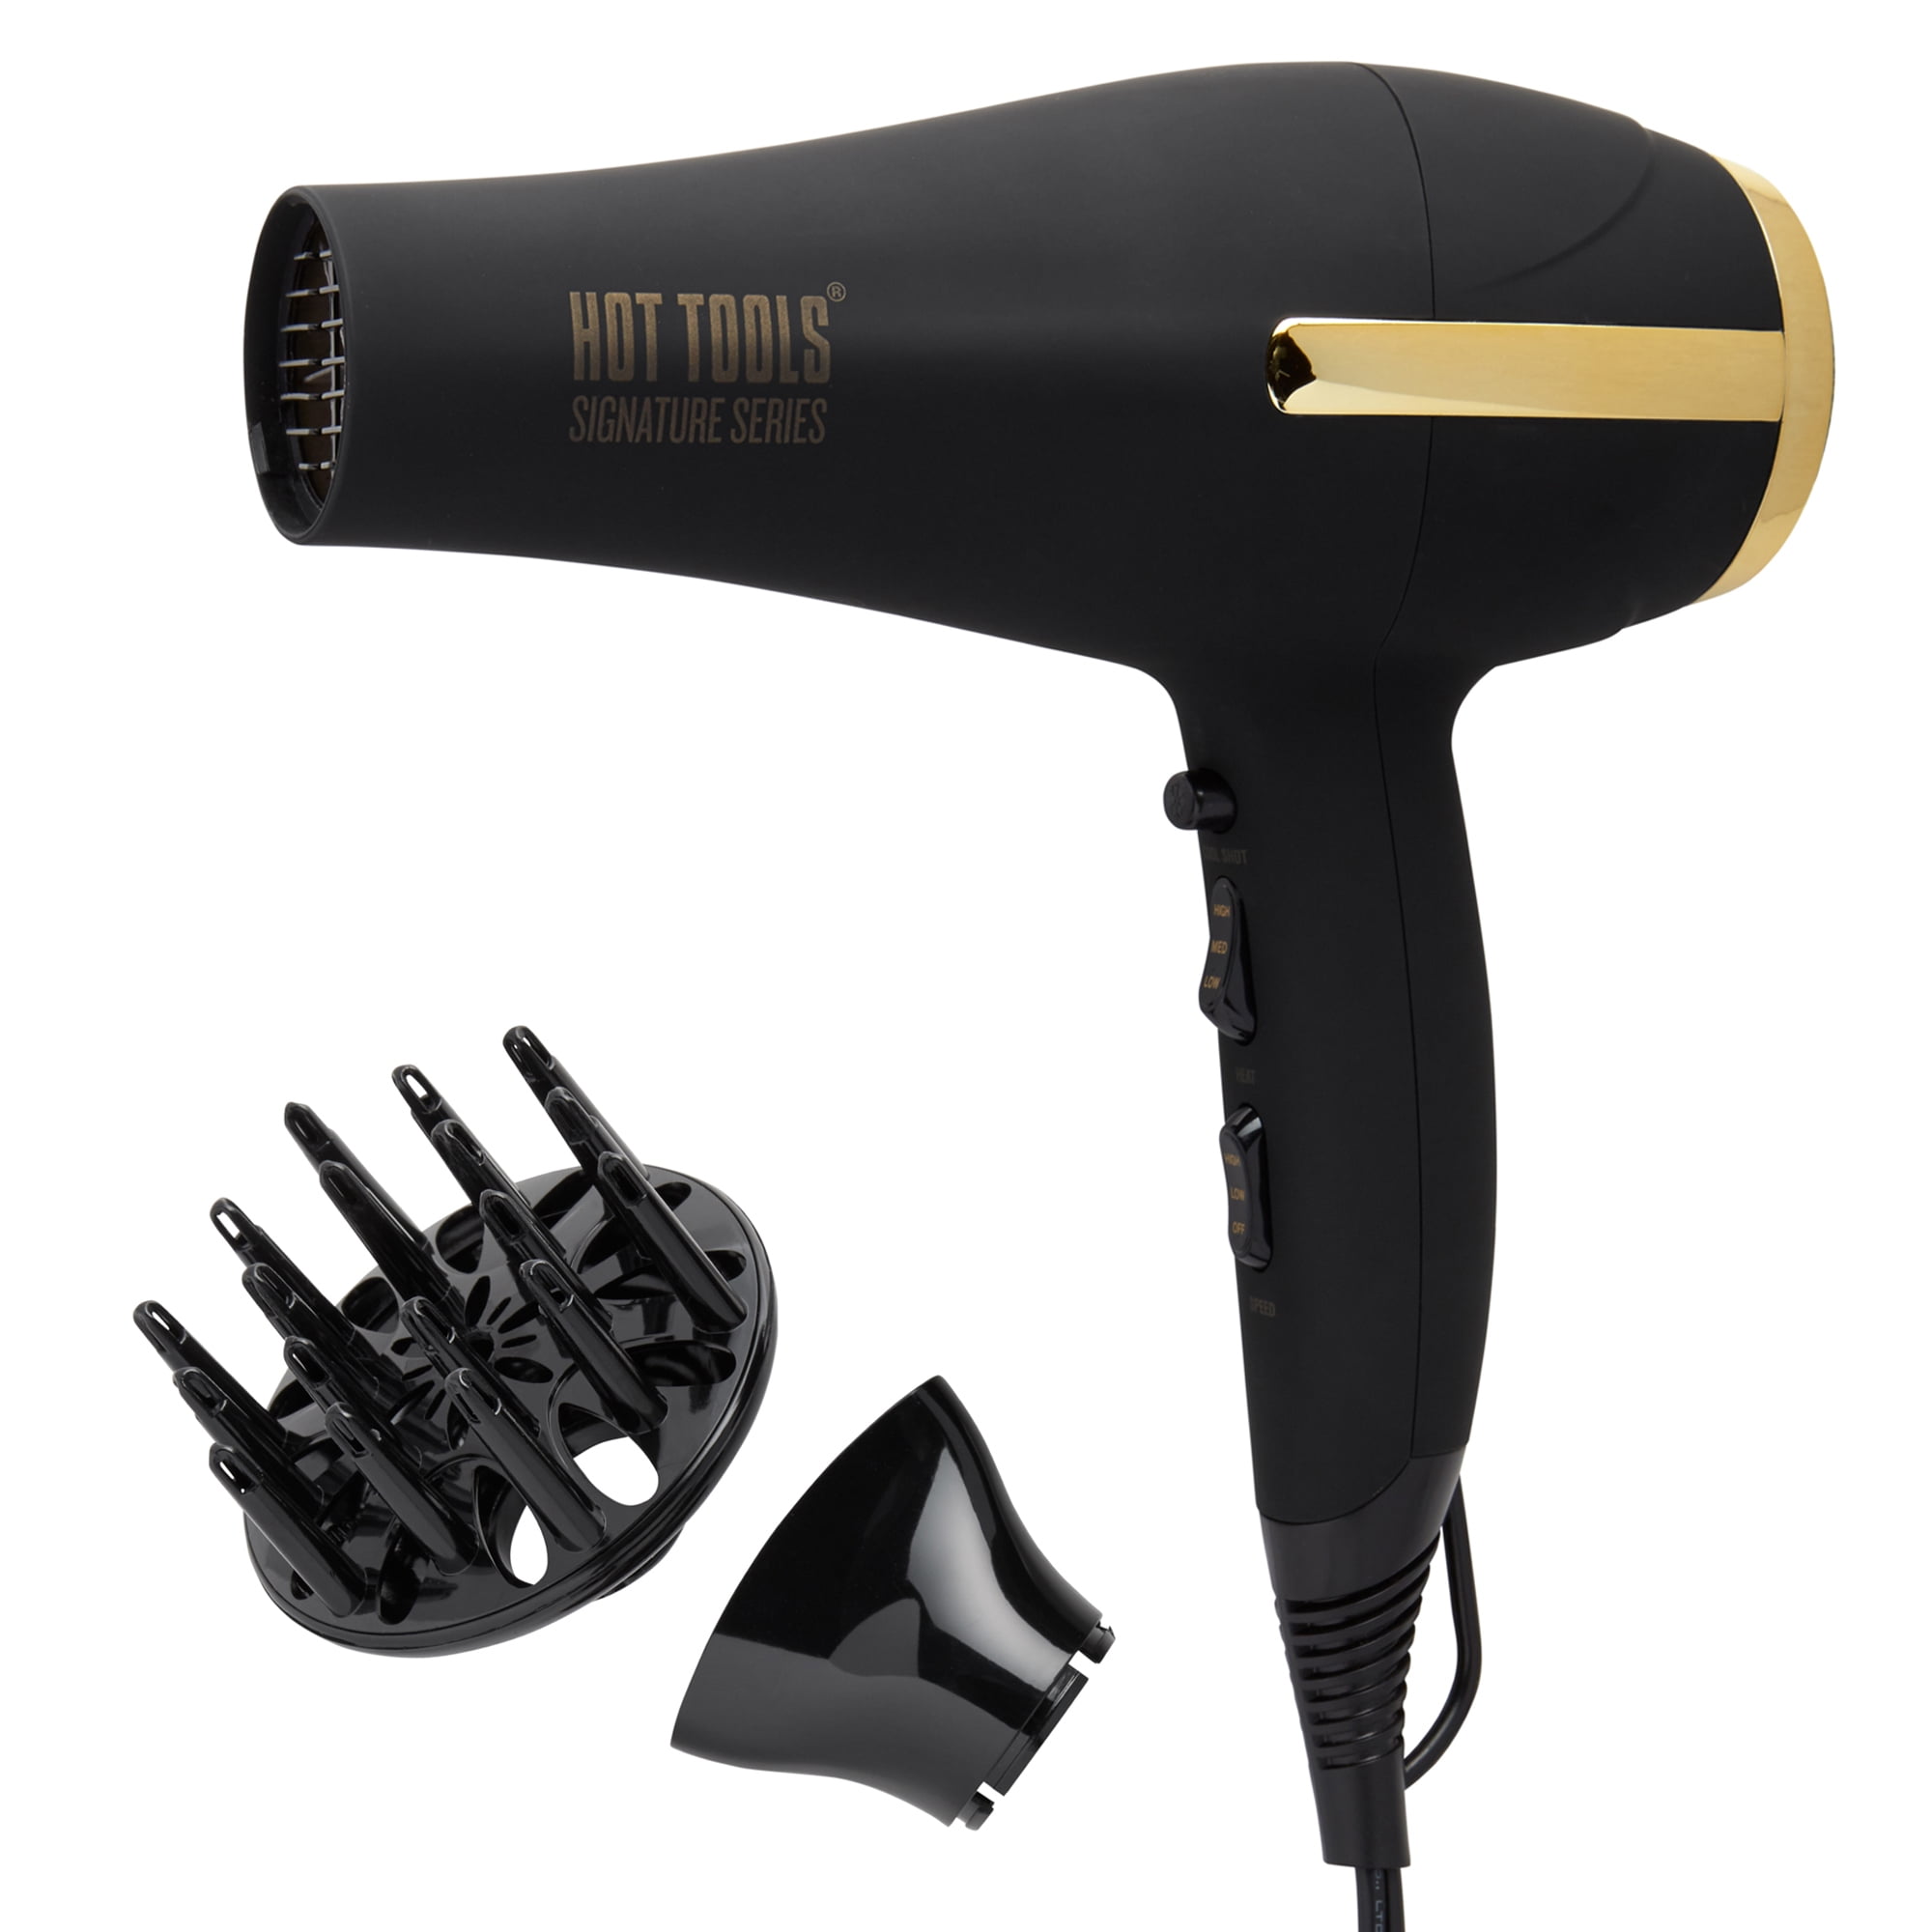 Hot Tools Pro Signature Ionic Ceramic Hair Dryer | Lightweight with  Professional Blowout Results - Walmart.com